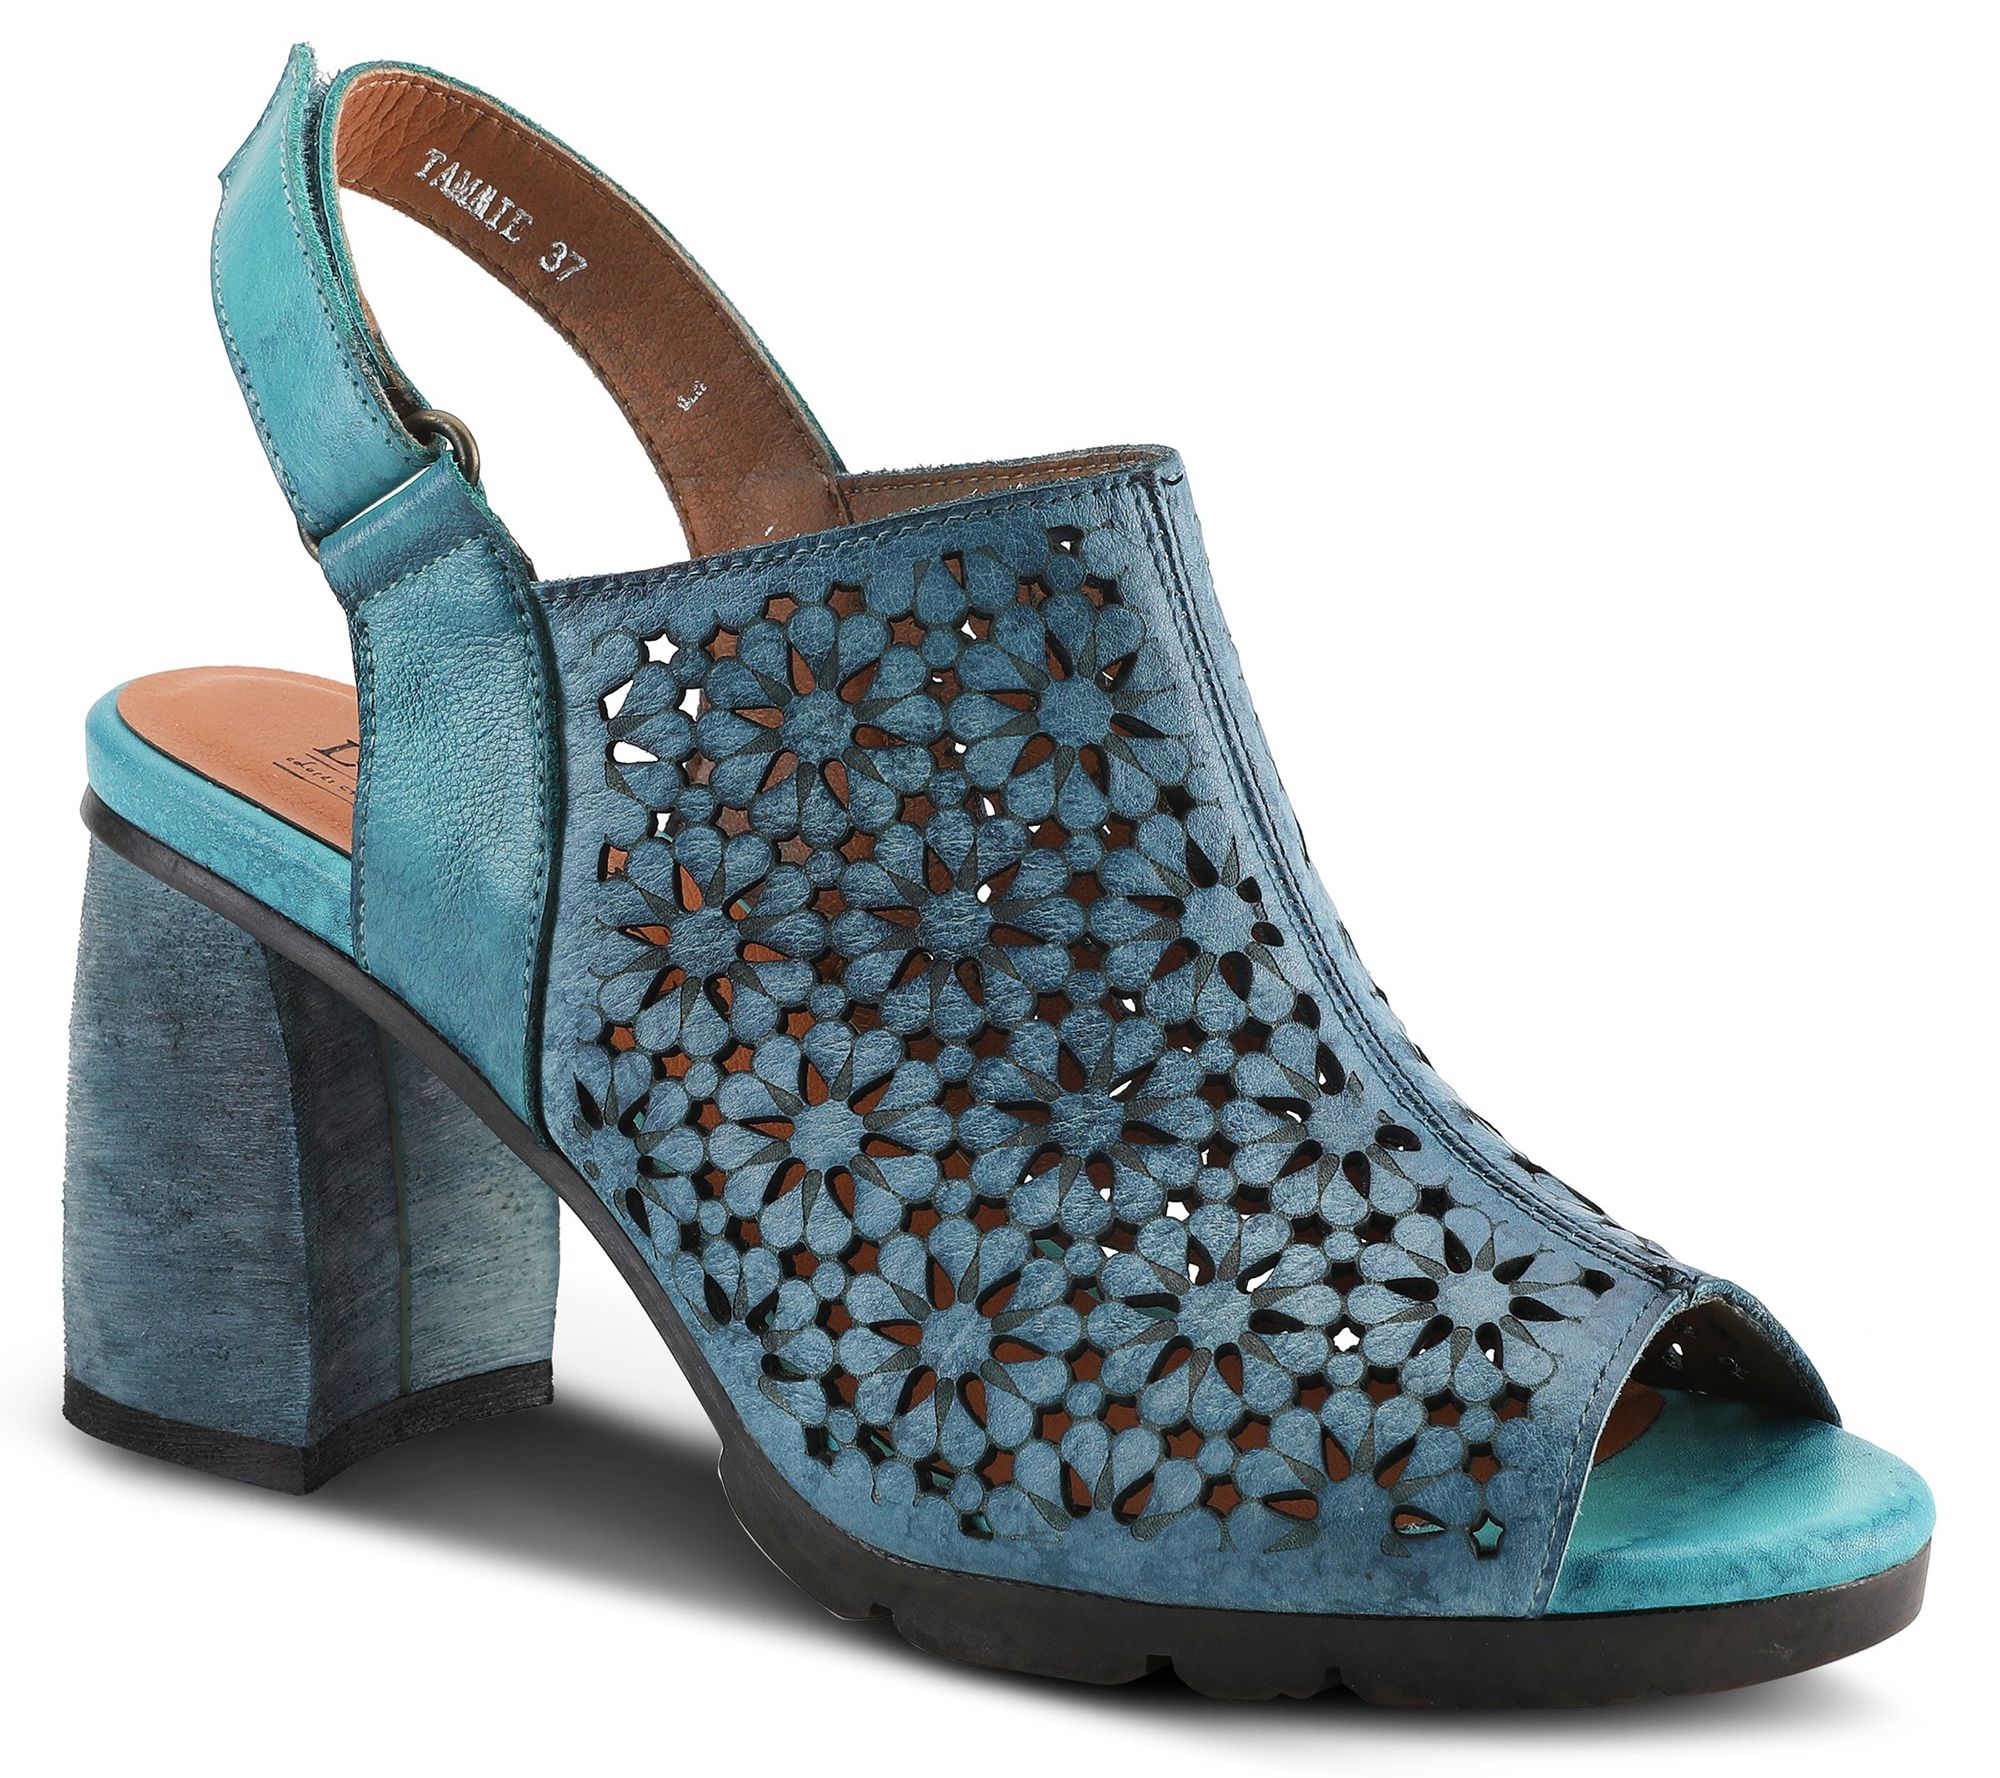 L'Artiste by Spring Step Leather Sandals - Tammie - QVC.com